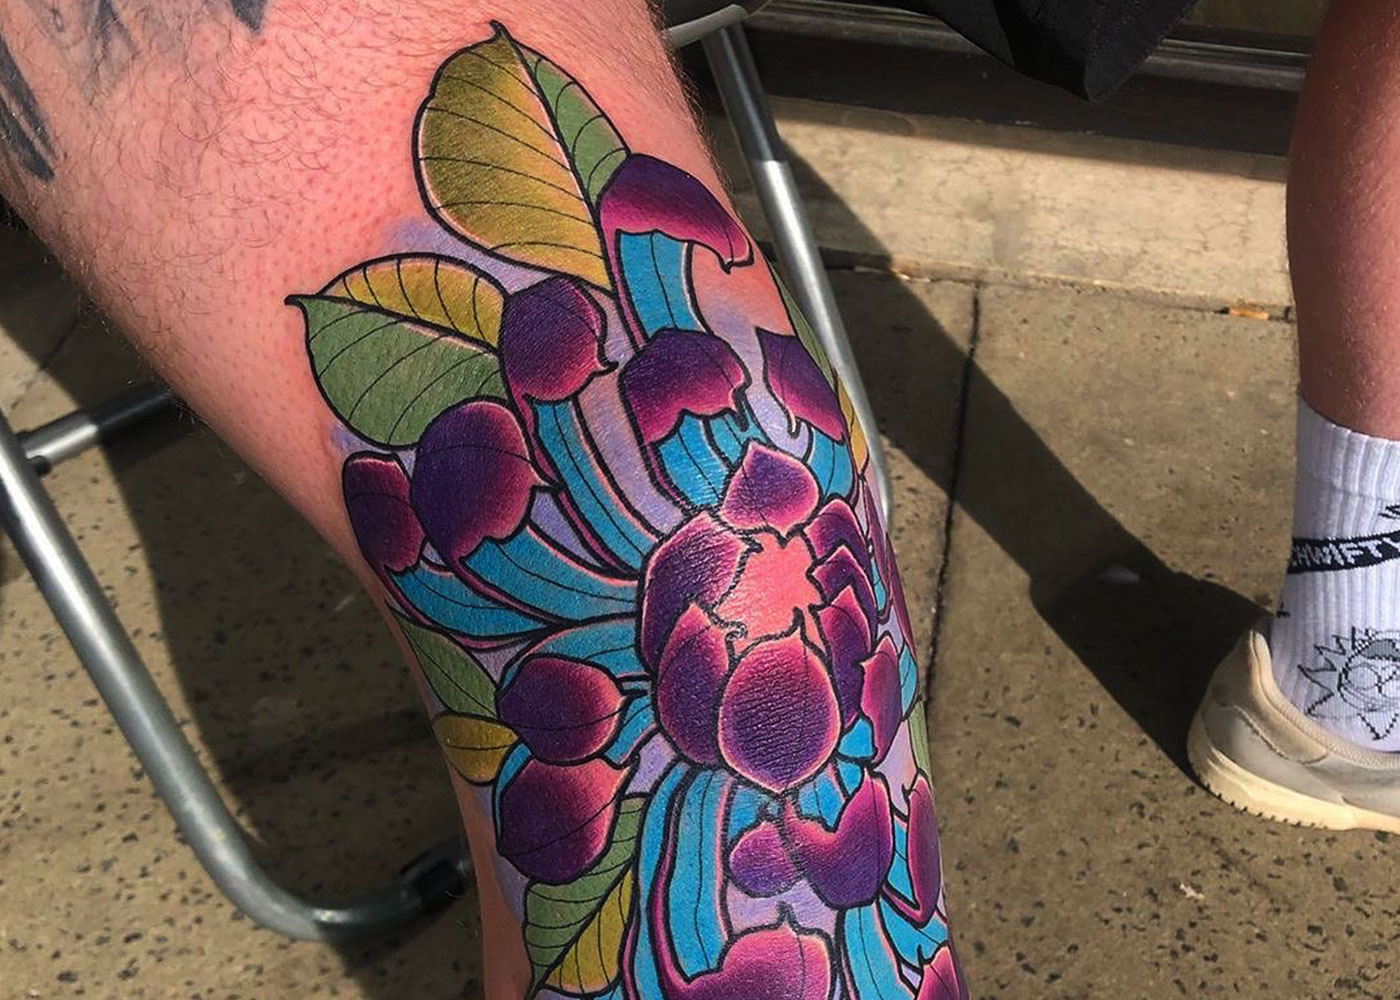 Lilac tattoo done by Lindsey Lohman at Lost Lake Tattoos in Madison WI  r tattoos